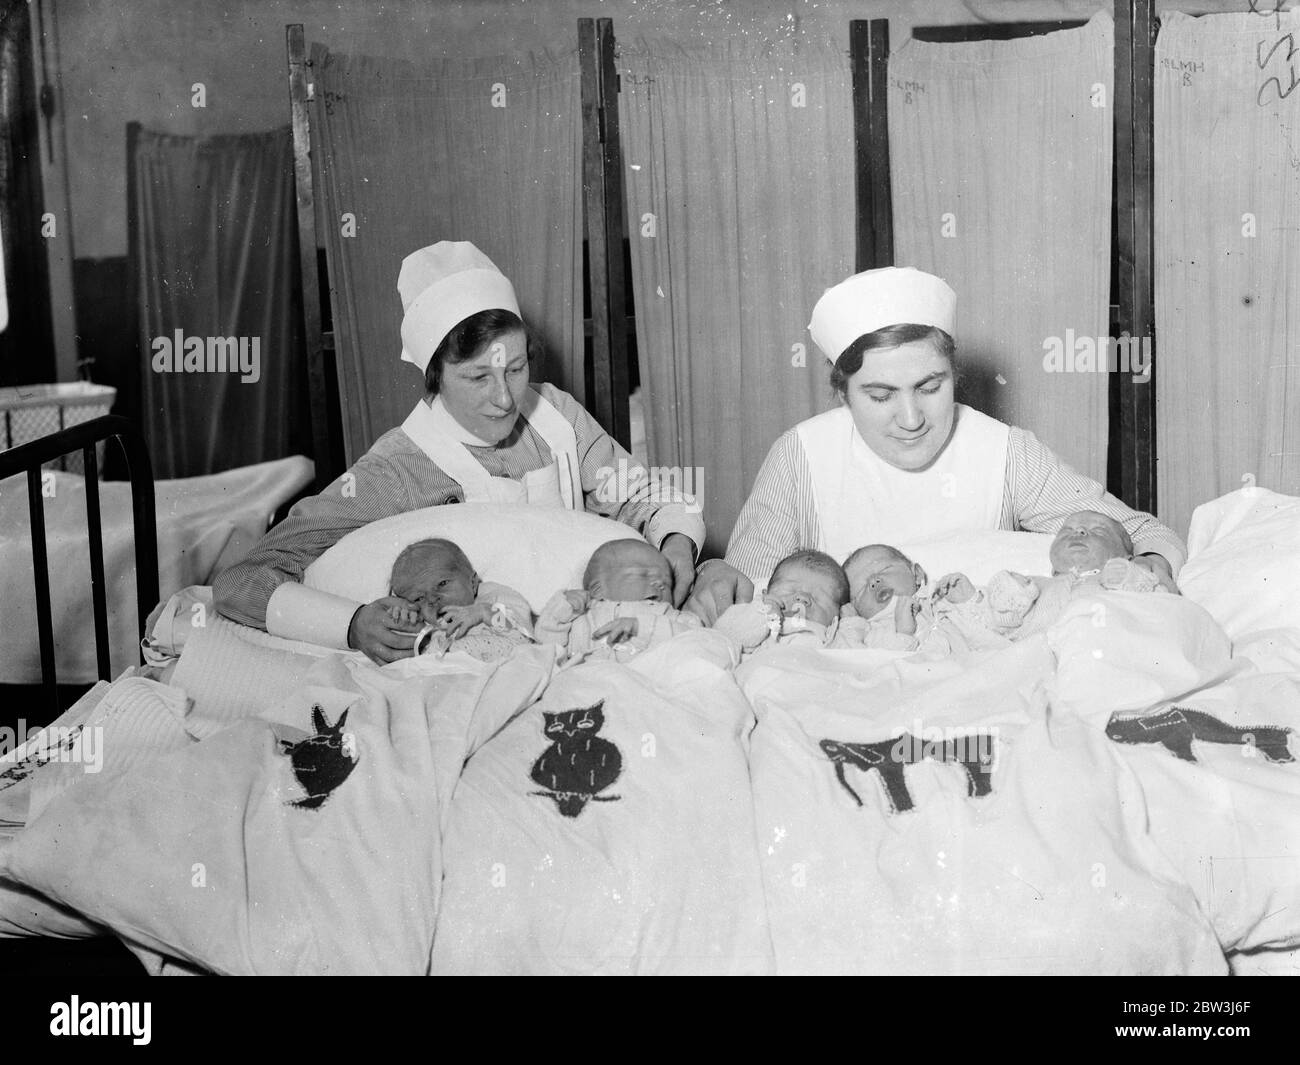 Leap year babies born in London . One birthday in four years . Five leap year babies , three boys and two girls have been born at the City of London Maternity Hospital . So far , the new arrivals are unworried by the prospect of having one birthday in four years ! . Photo shows , the Leap Year babies at the City of London Maternity Hospital . 29 February 1936 Stock Photo